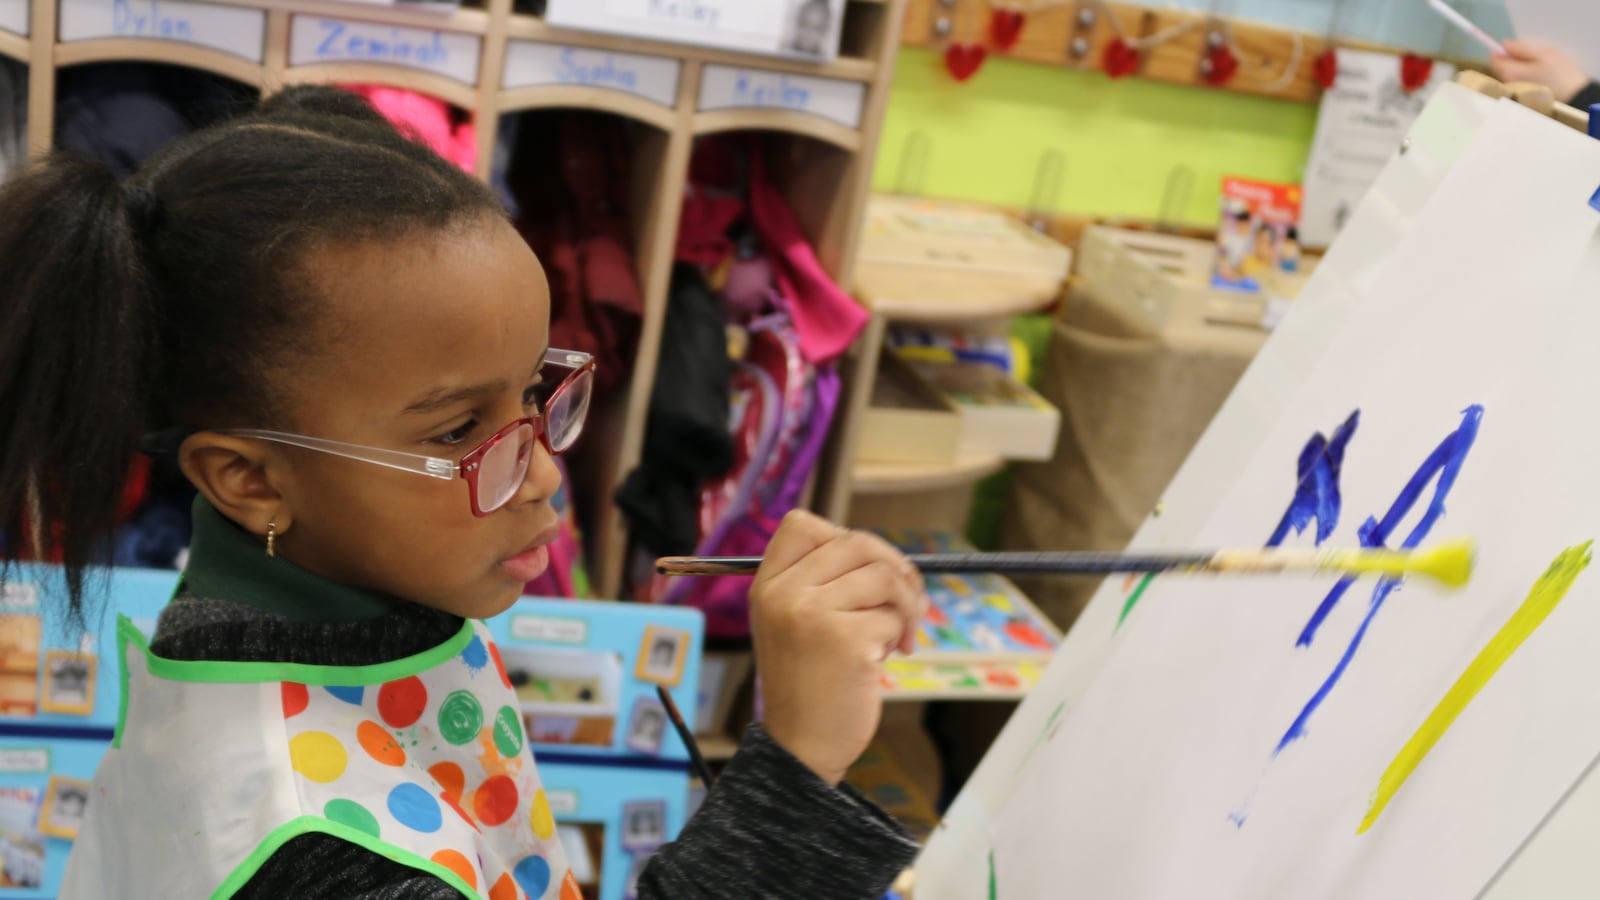 A student at P.S. 69 Journey Prep in the Bronx paints a picture. The school uses a Reggio Emilia approach and is in the city's Showcase Schools program.